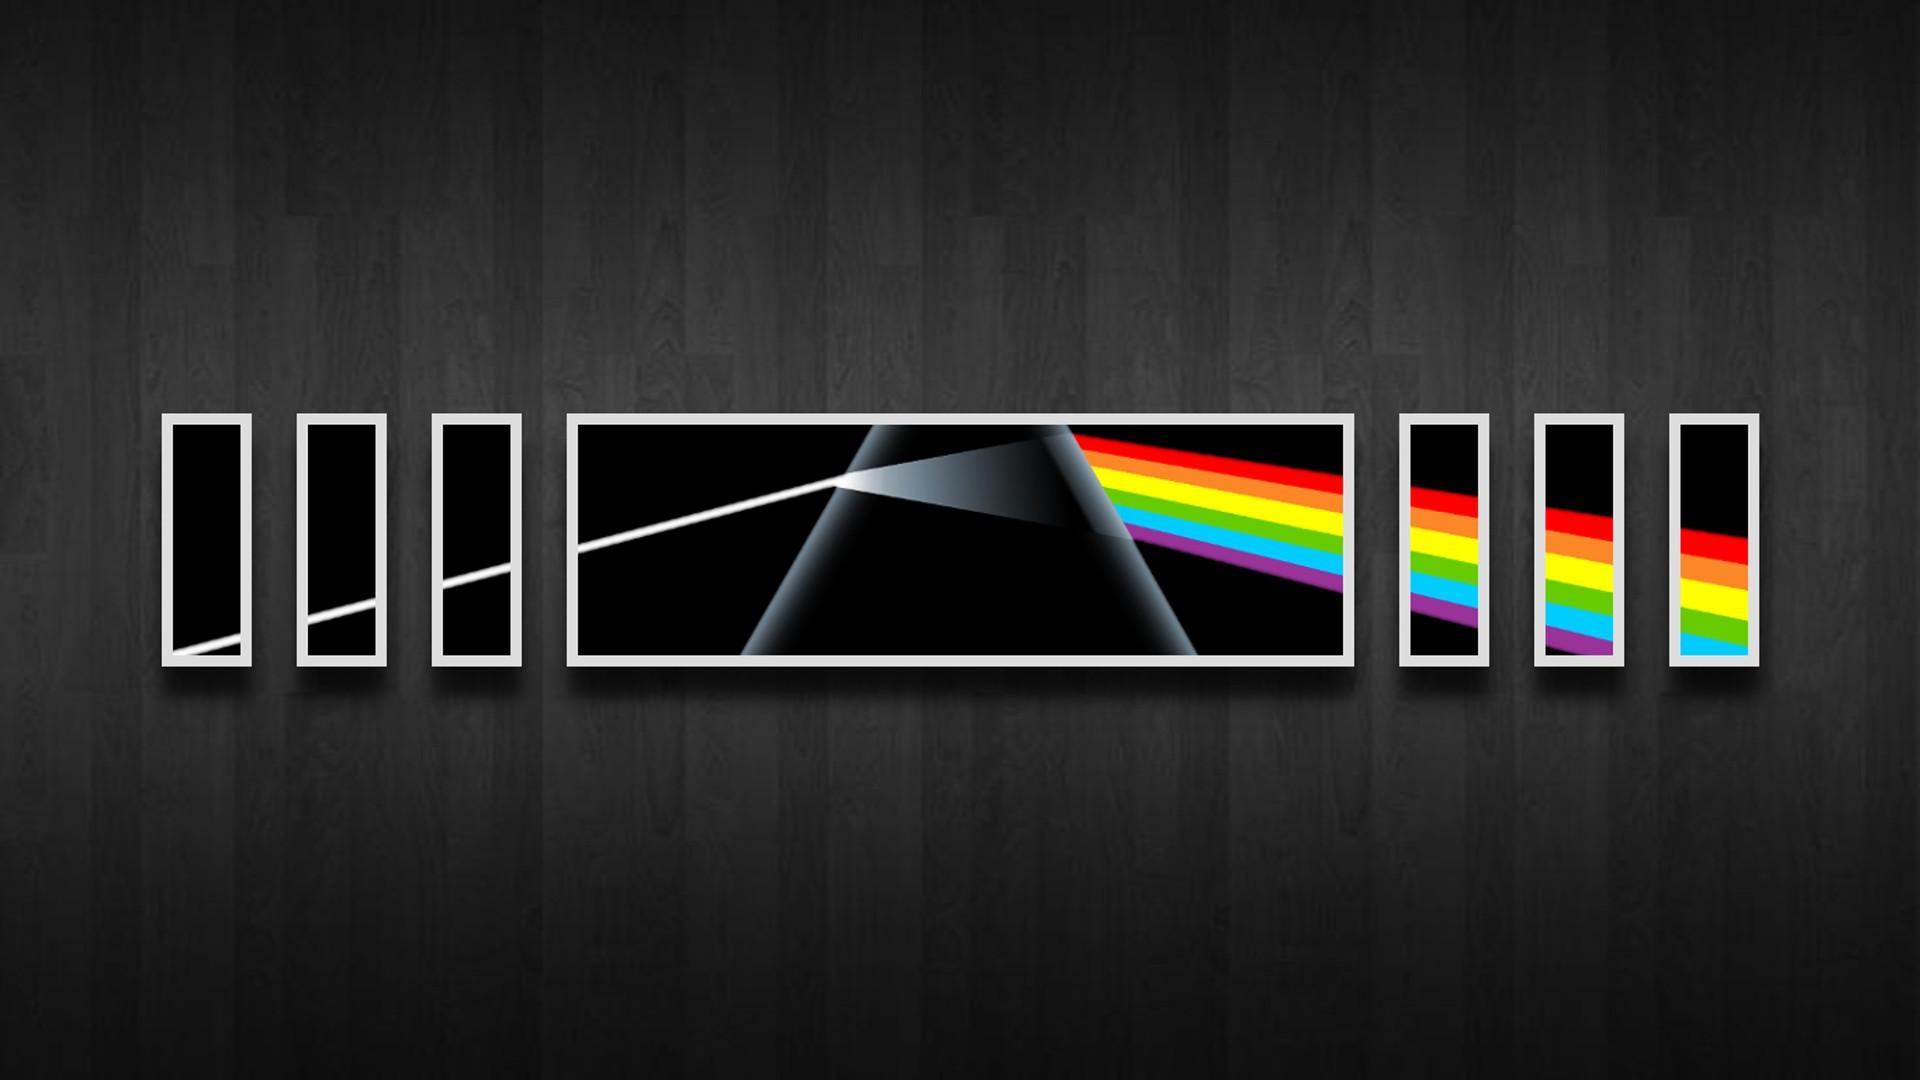 Pink Floyd, Album covers Wallpaper HD / Desktop and Mobile Background